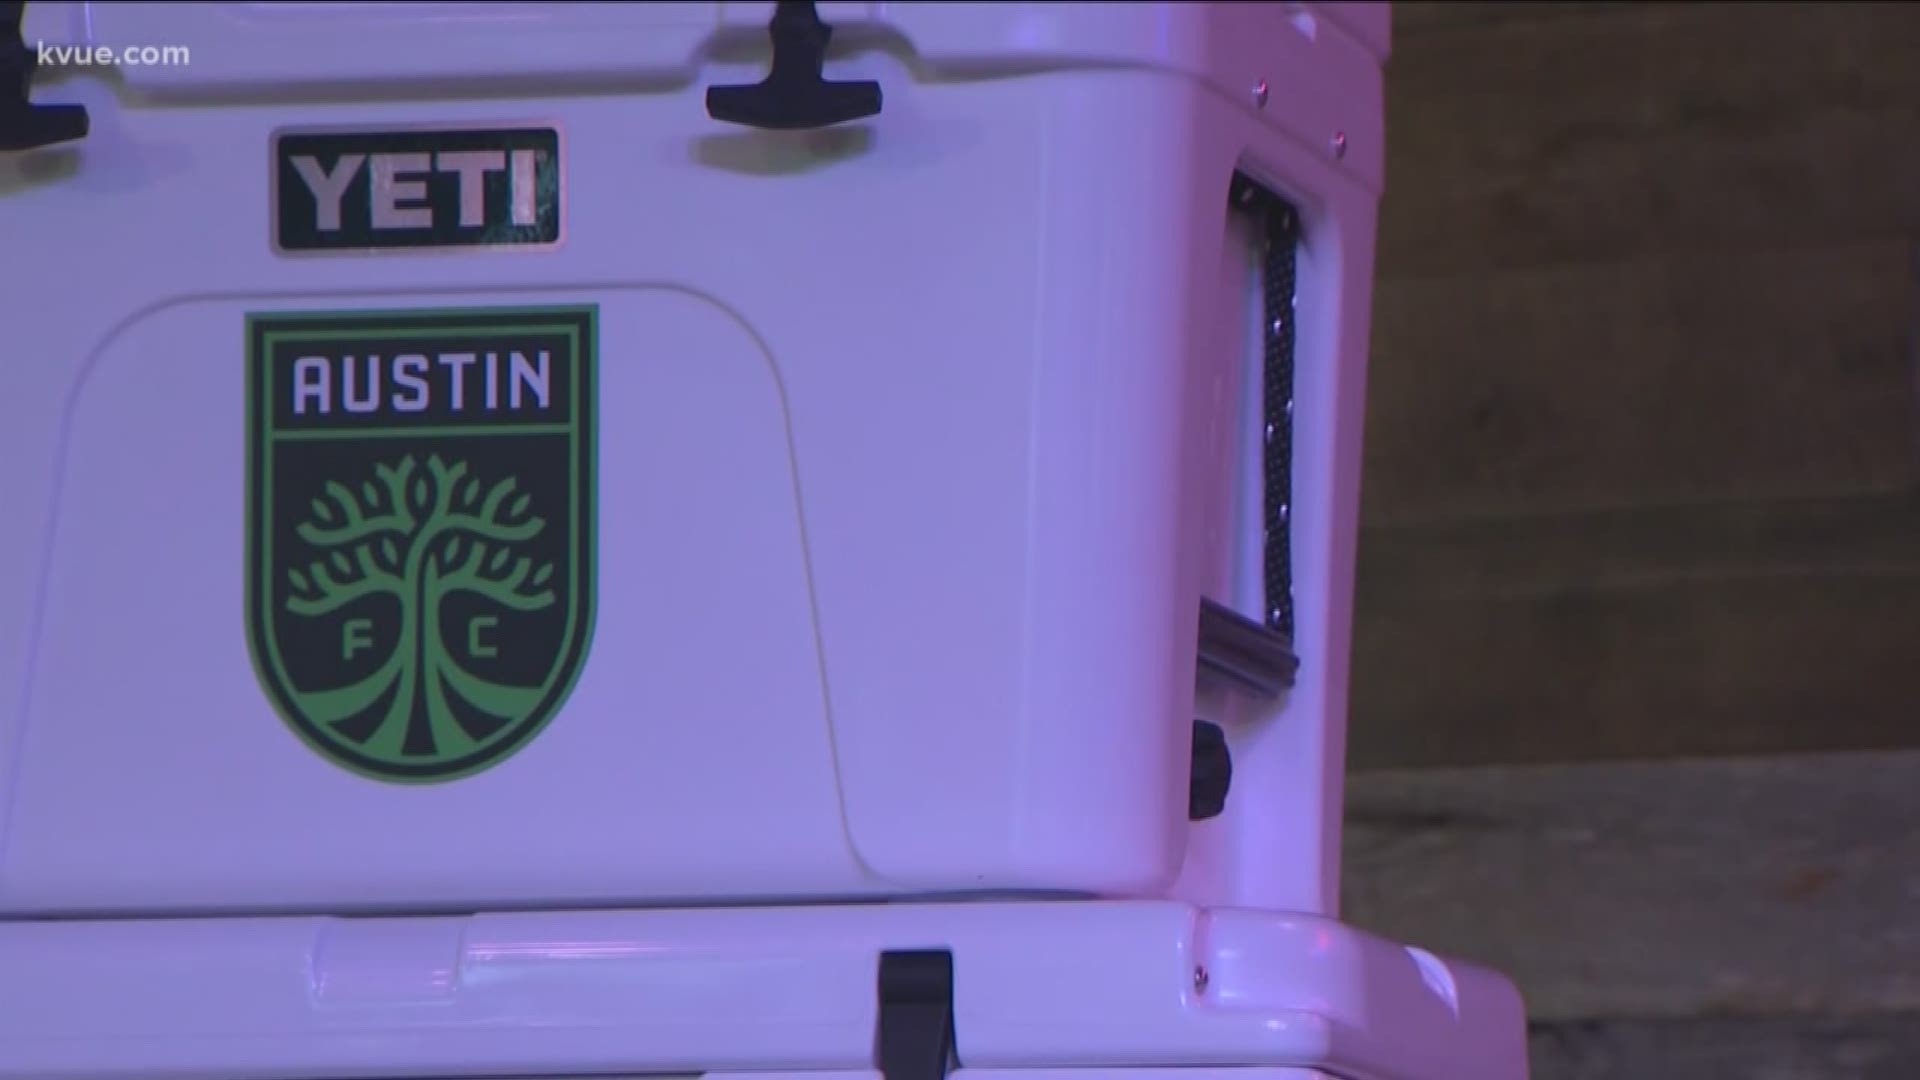 Austin FC officially announced YETI as their jersey partner on Monday.